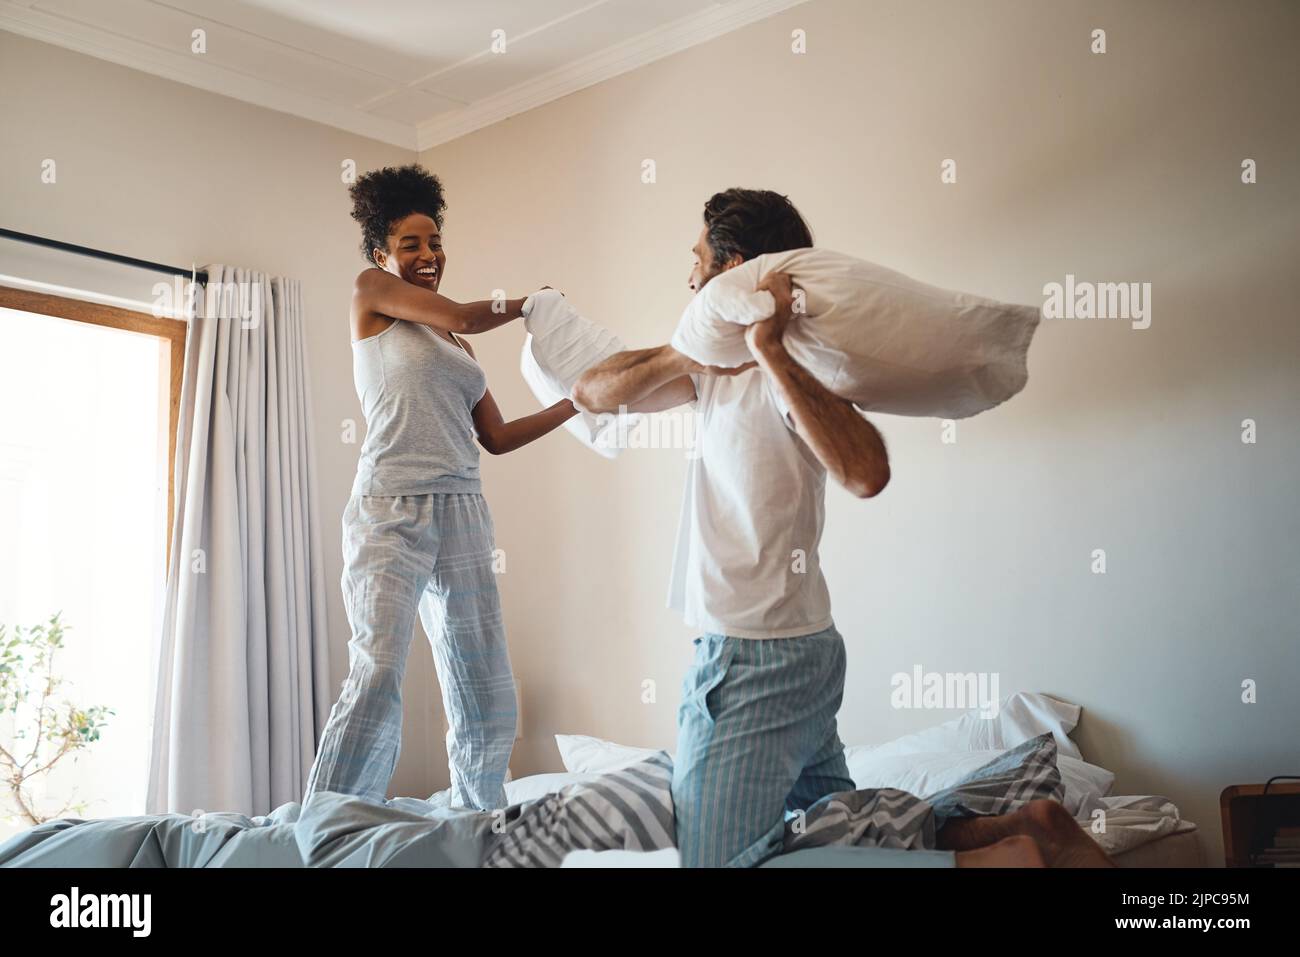 Pillow fight, playing and bonding with a happy couple playing, bonding and spending time together in their bedroom at home. Laughing, having fun and Stock Photo